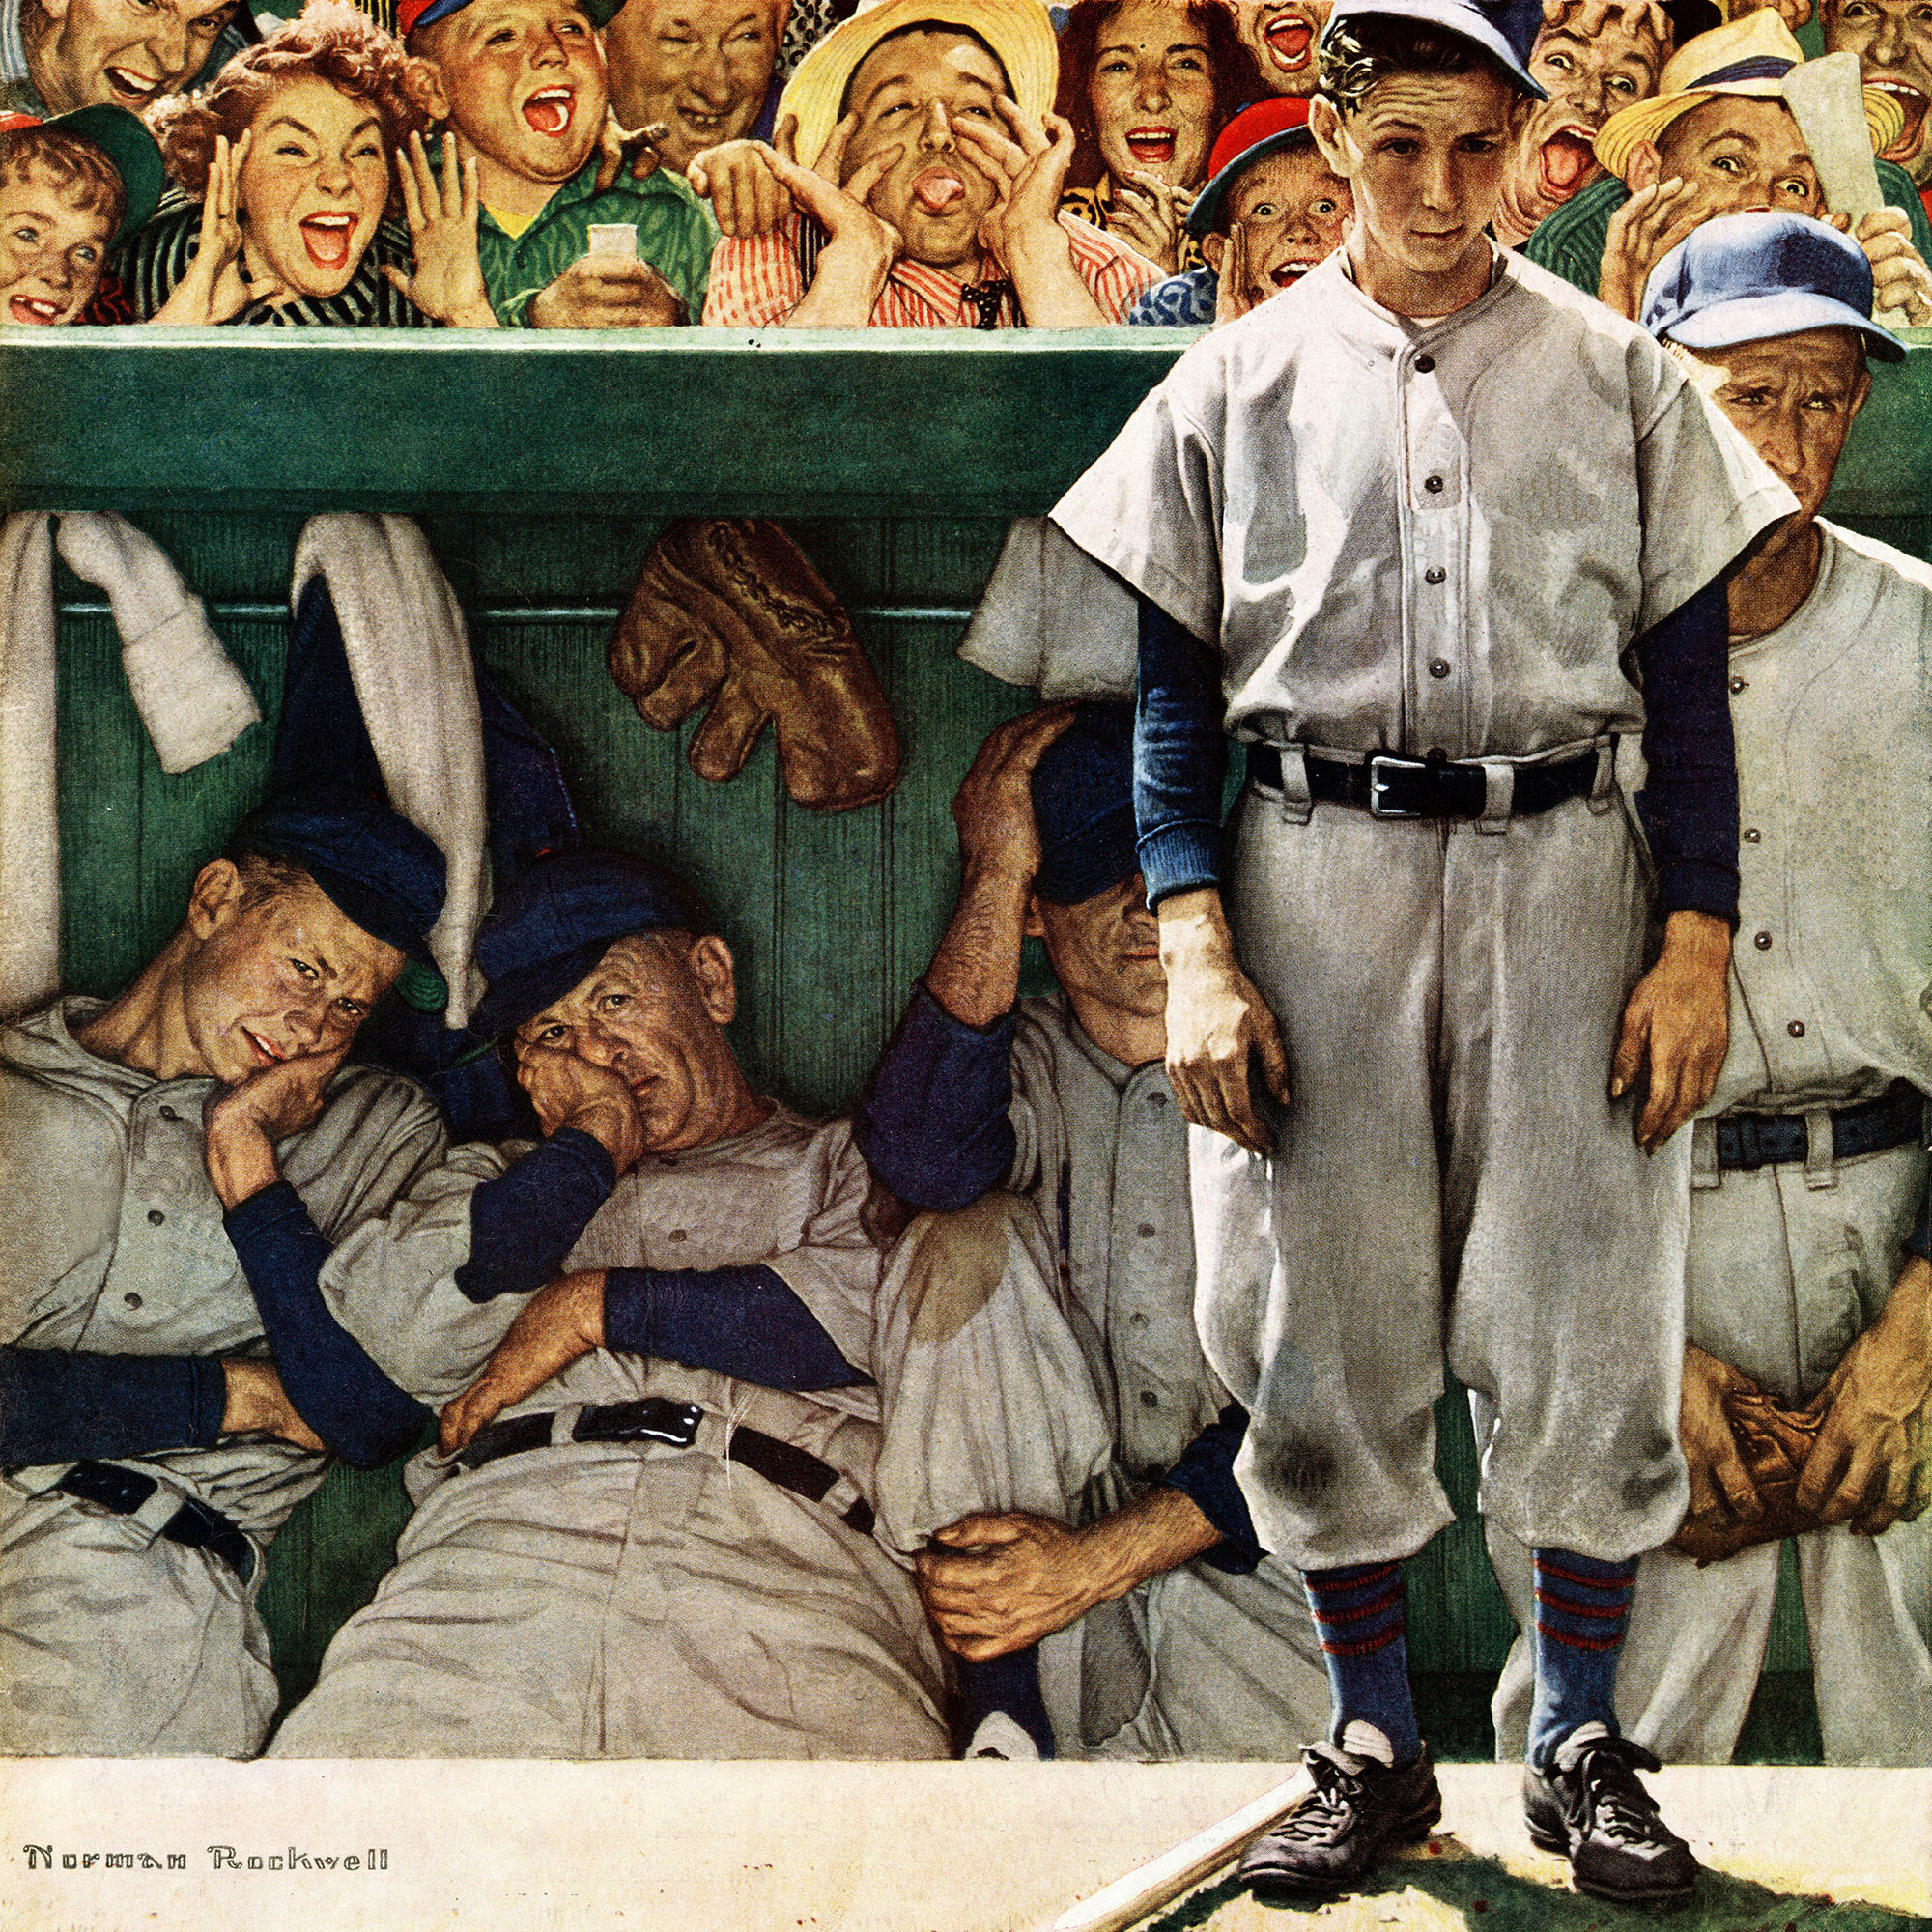 Norman Rockwell was one of America's leading artists. 